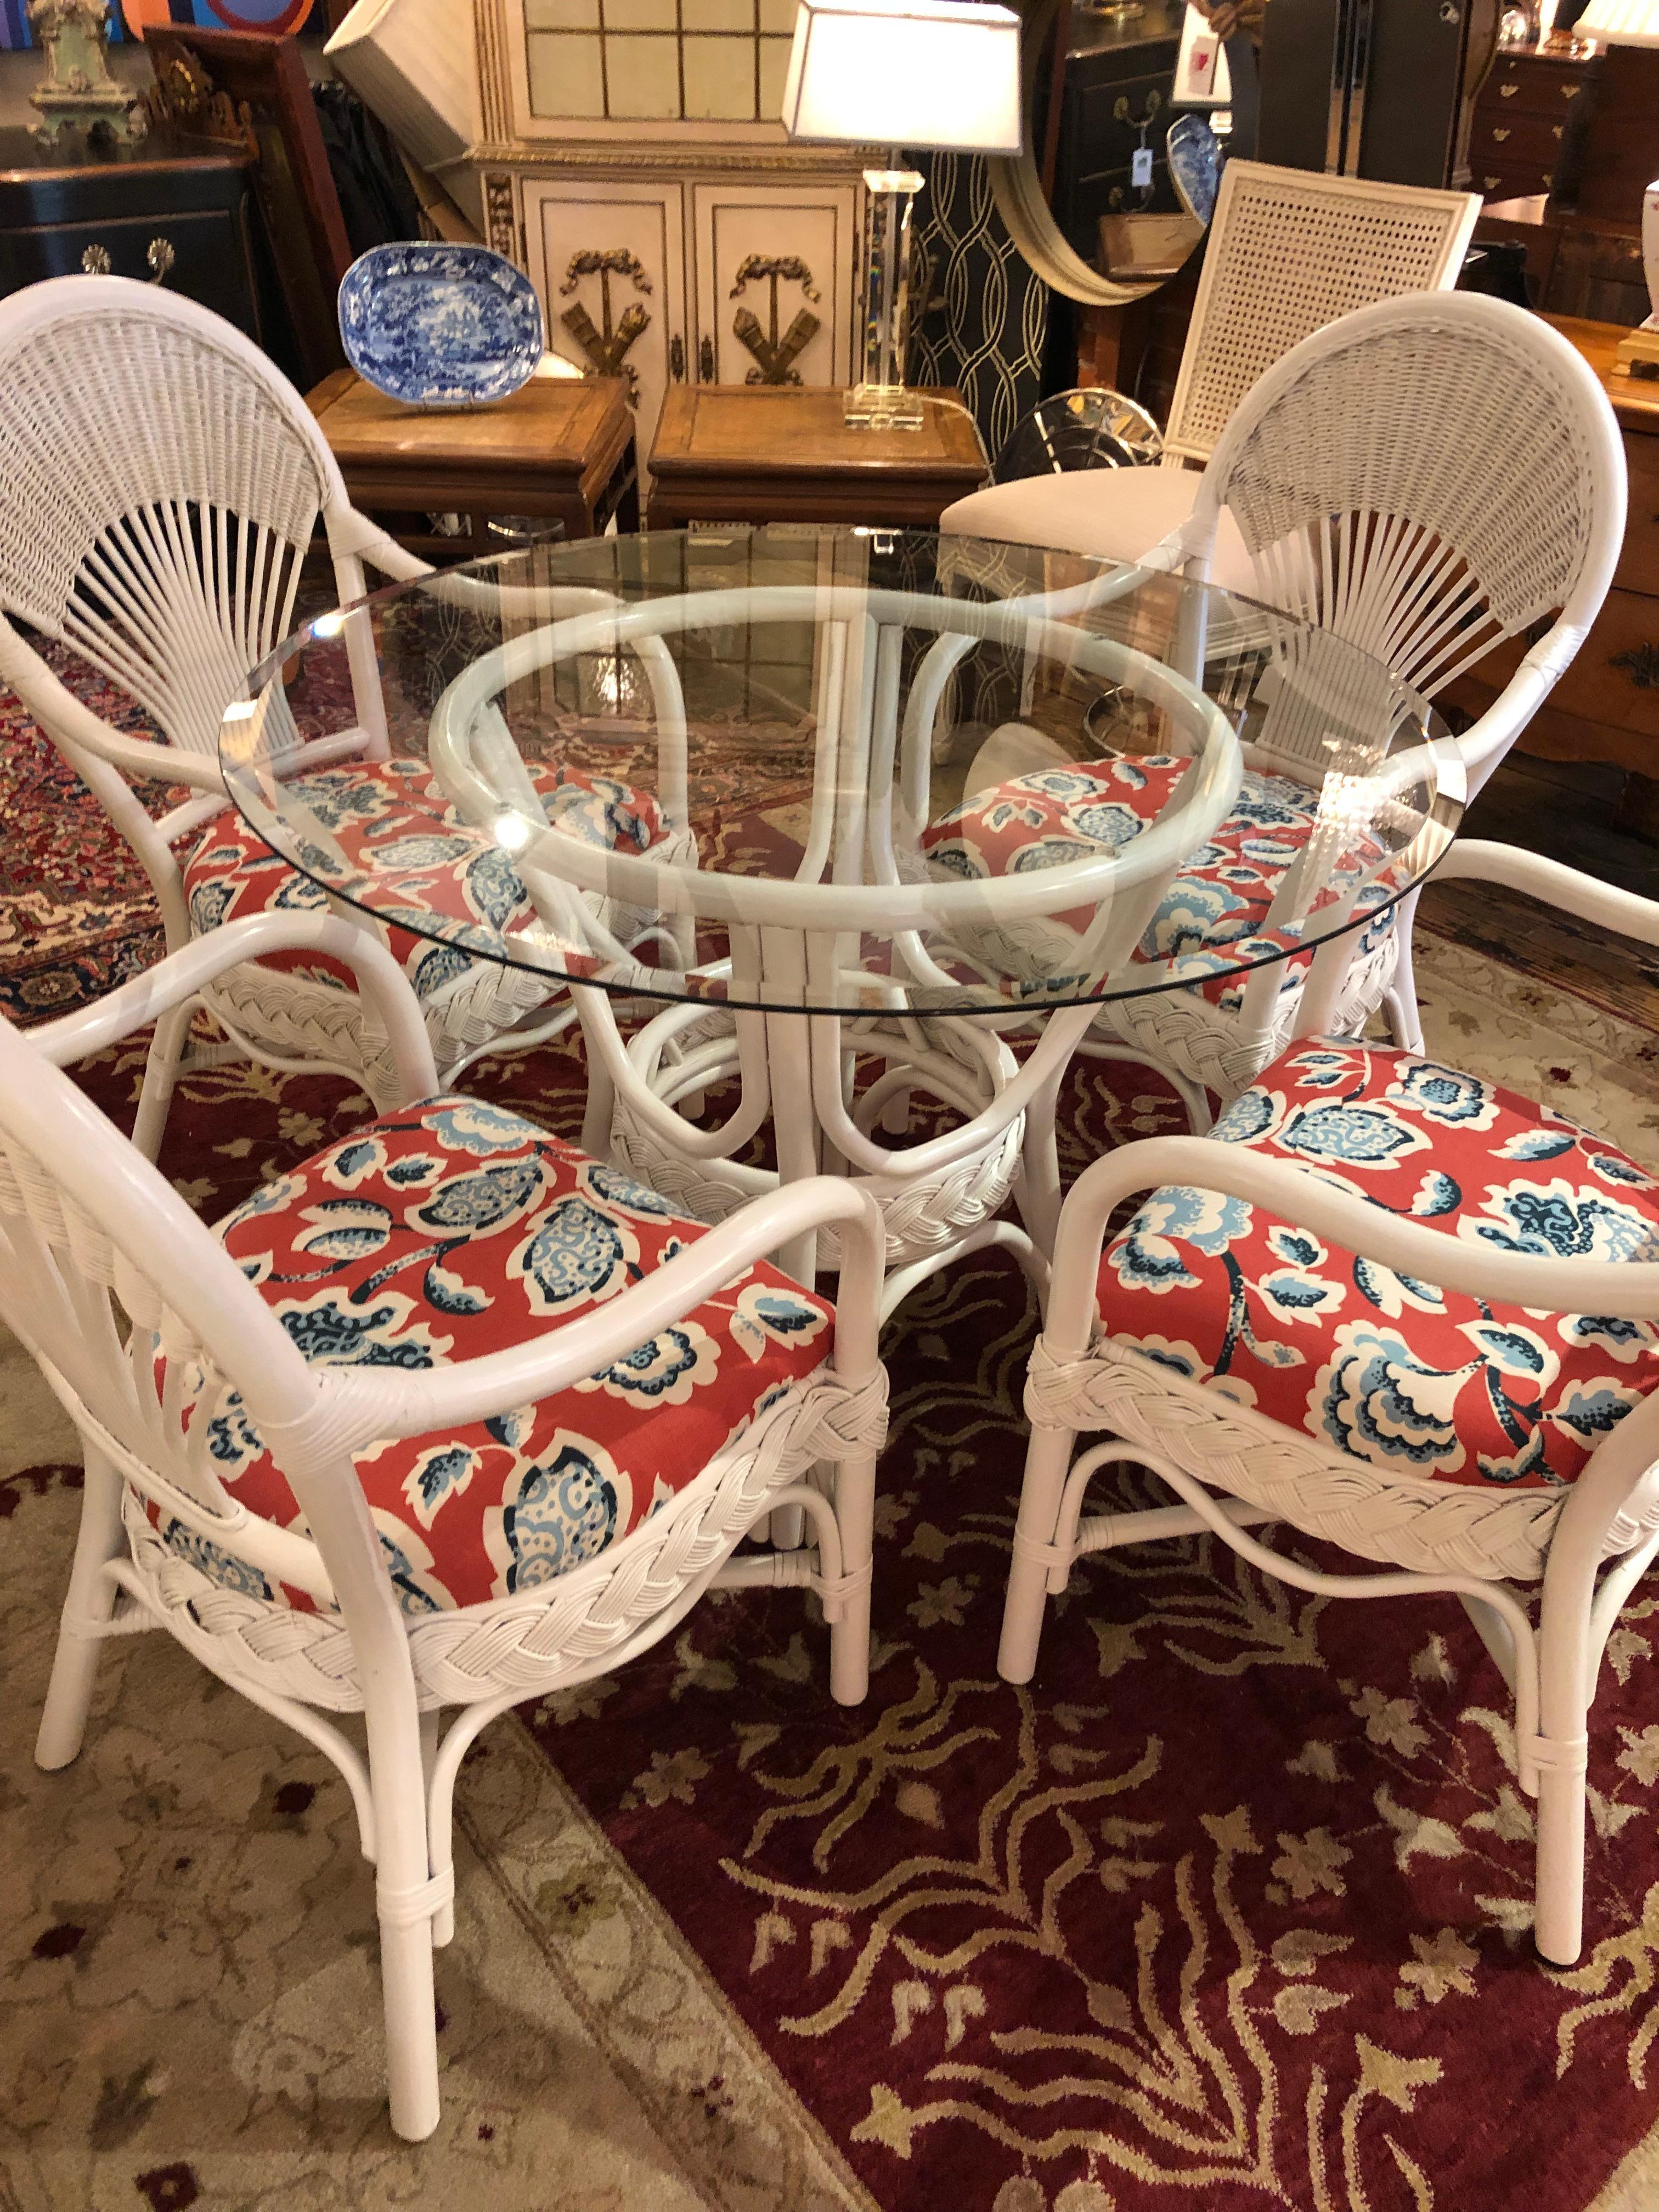 Summery versatile white wicker round dining table and chair set having bevelled round glass top table and four comfortable Classic fan back arm chairs upholstered in lively red, white and blue fabric. Pour the lemonade!
Perfect for a